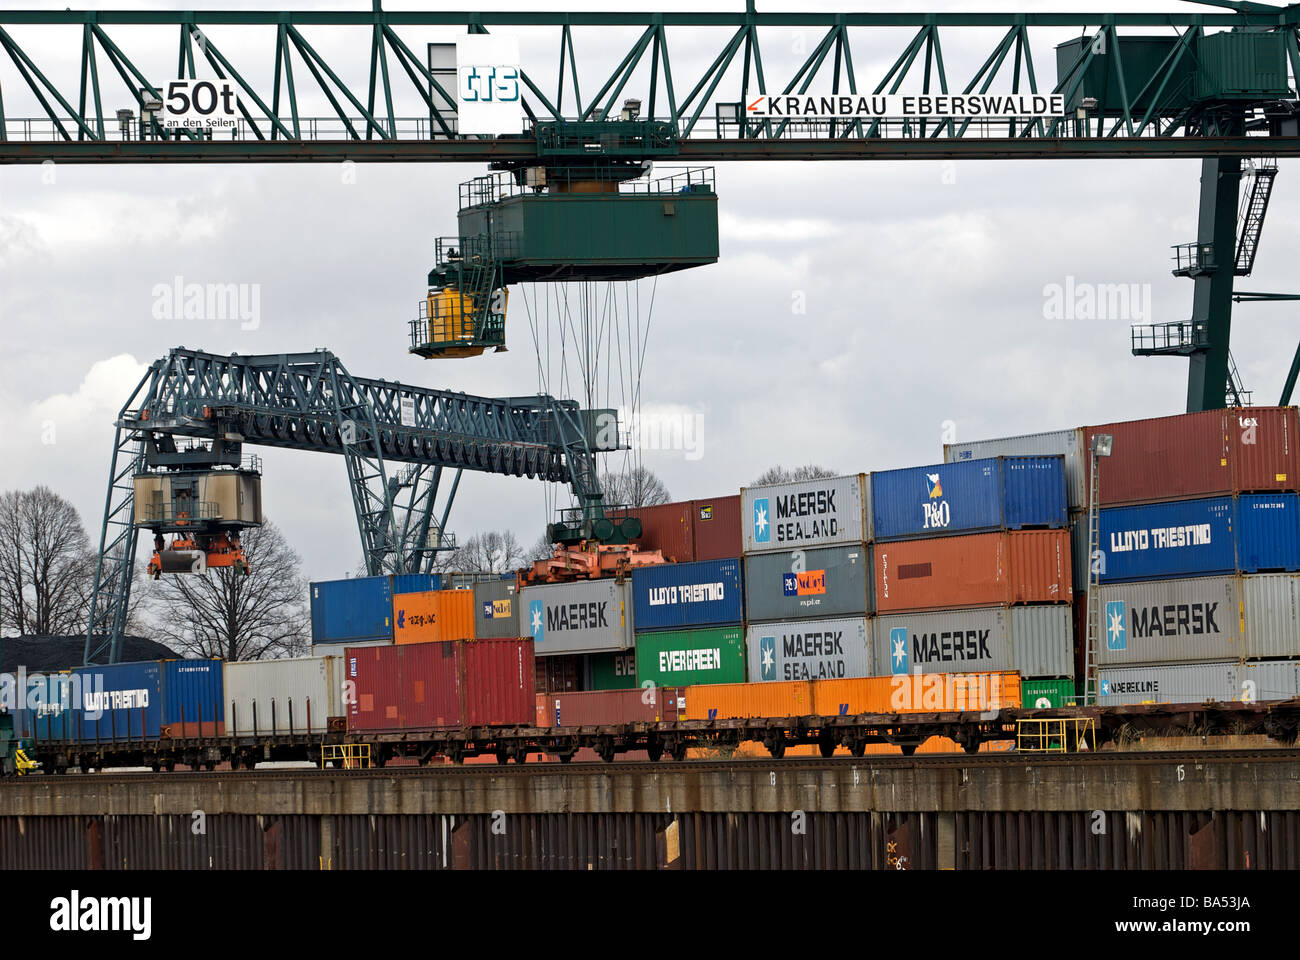 Neihl 1 container terminal, Cologne, North Rhine-Westphalia, Germany. Stock Photo